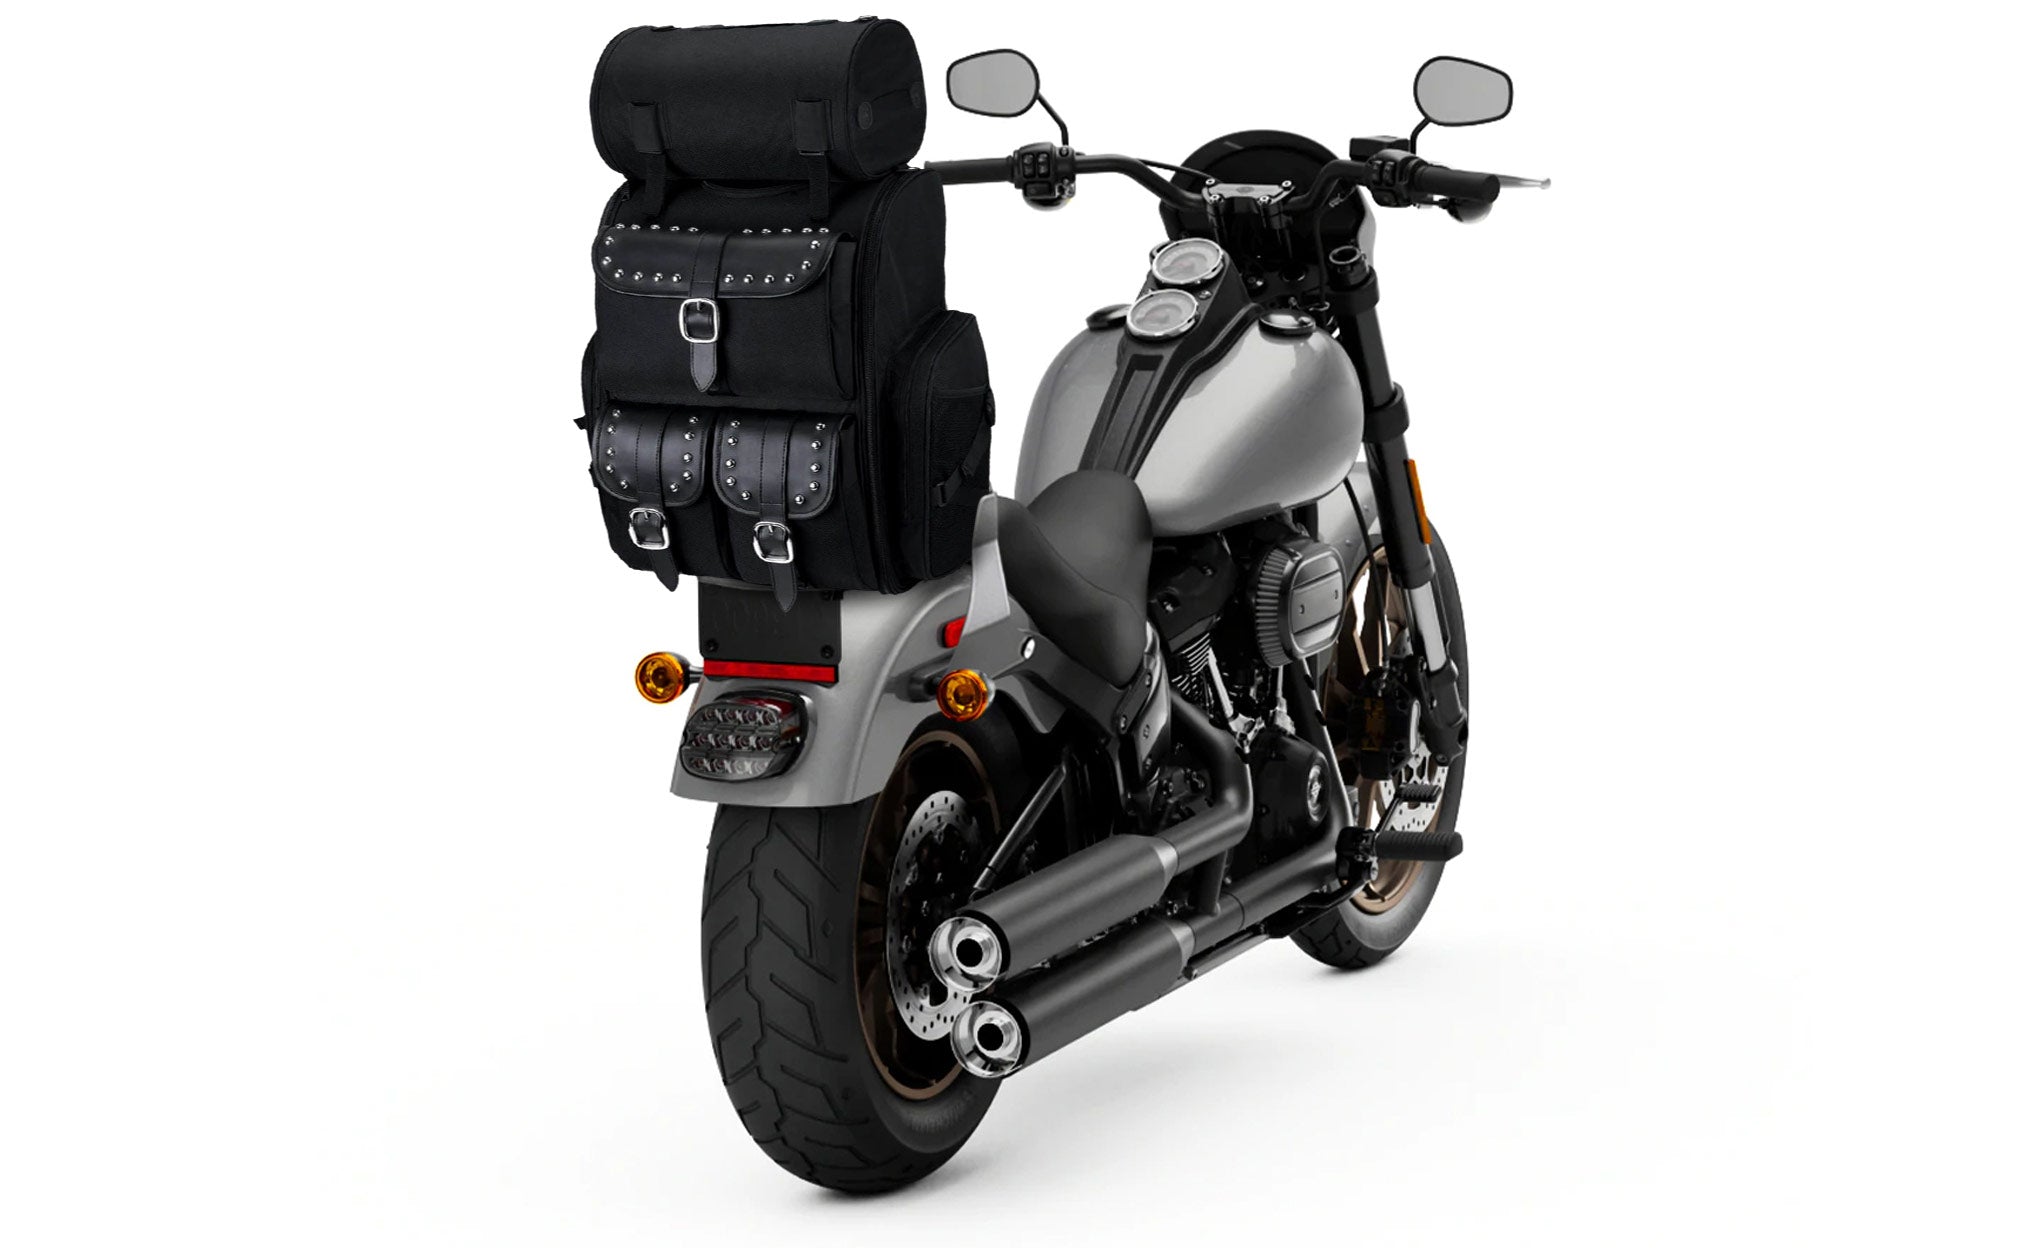 Viking Highway Extra Large Studded Motorcycle Tail Bag Bag on Bike View @expand